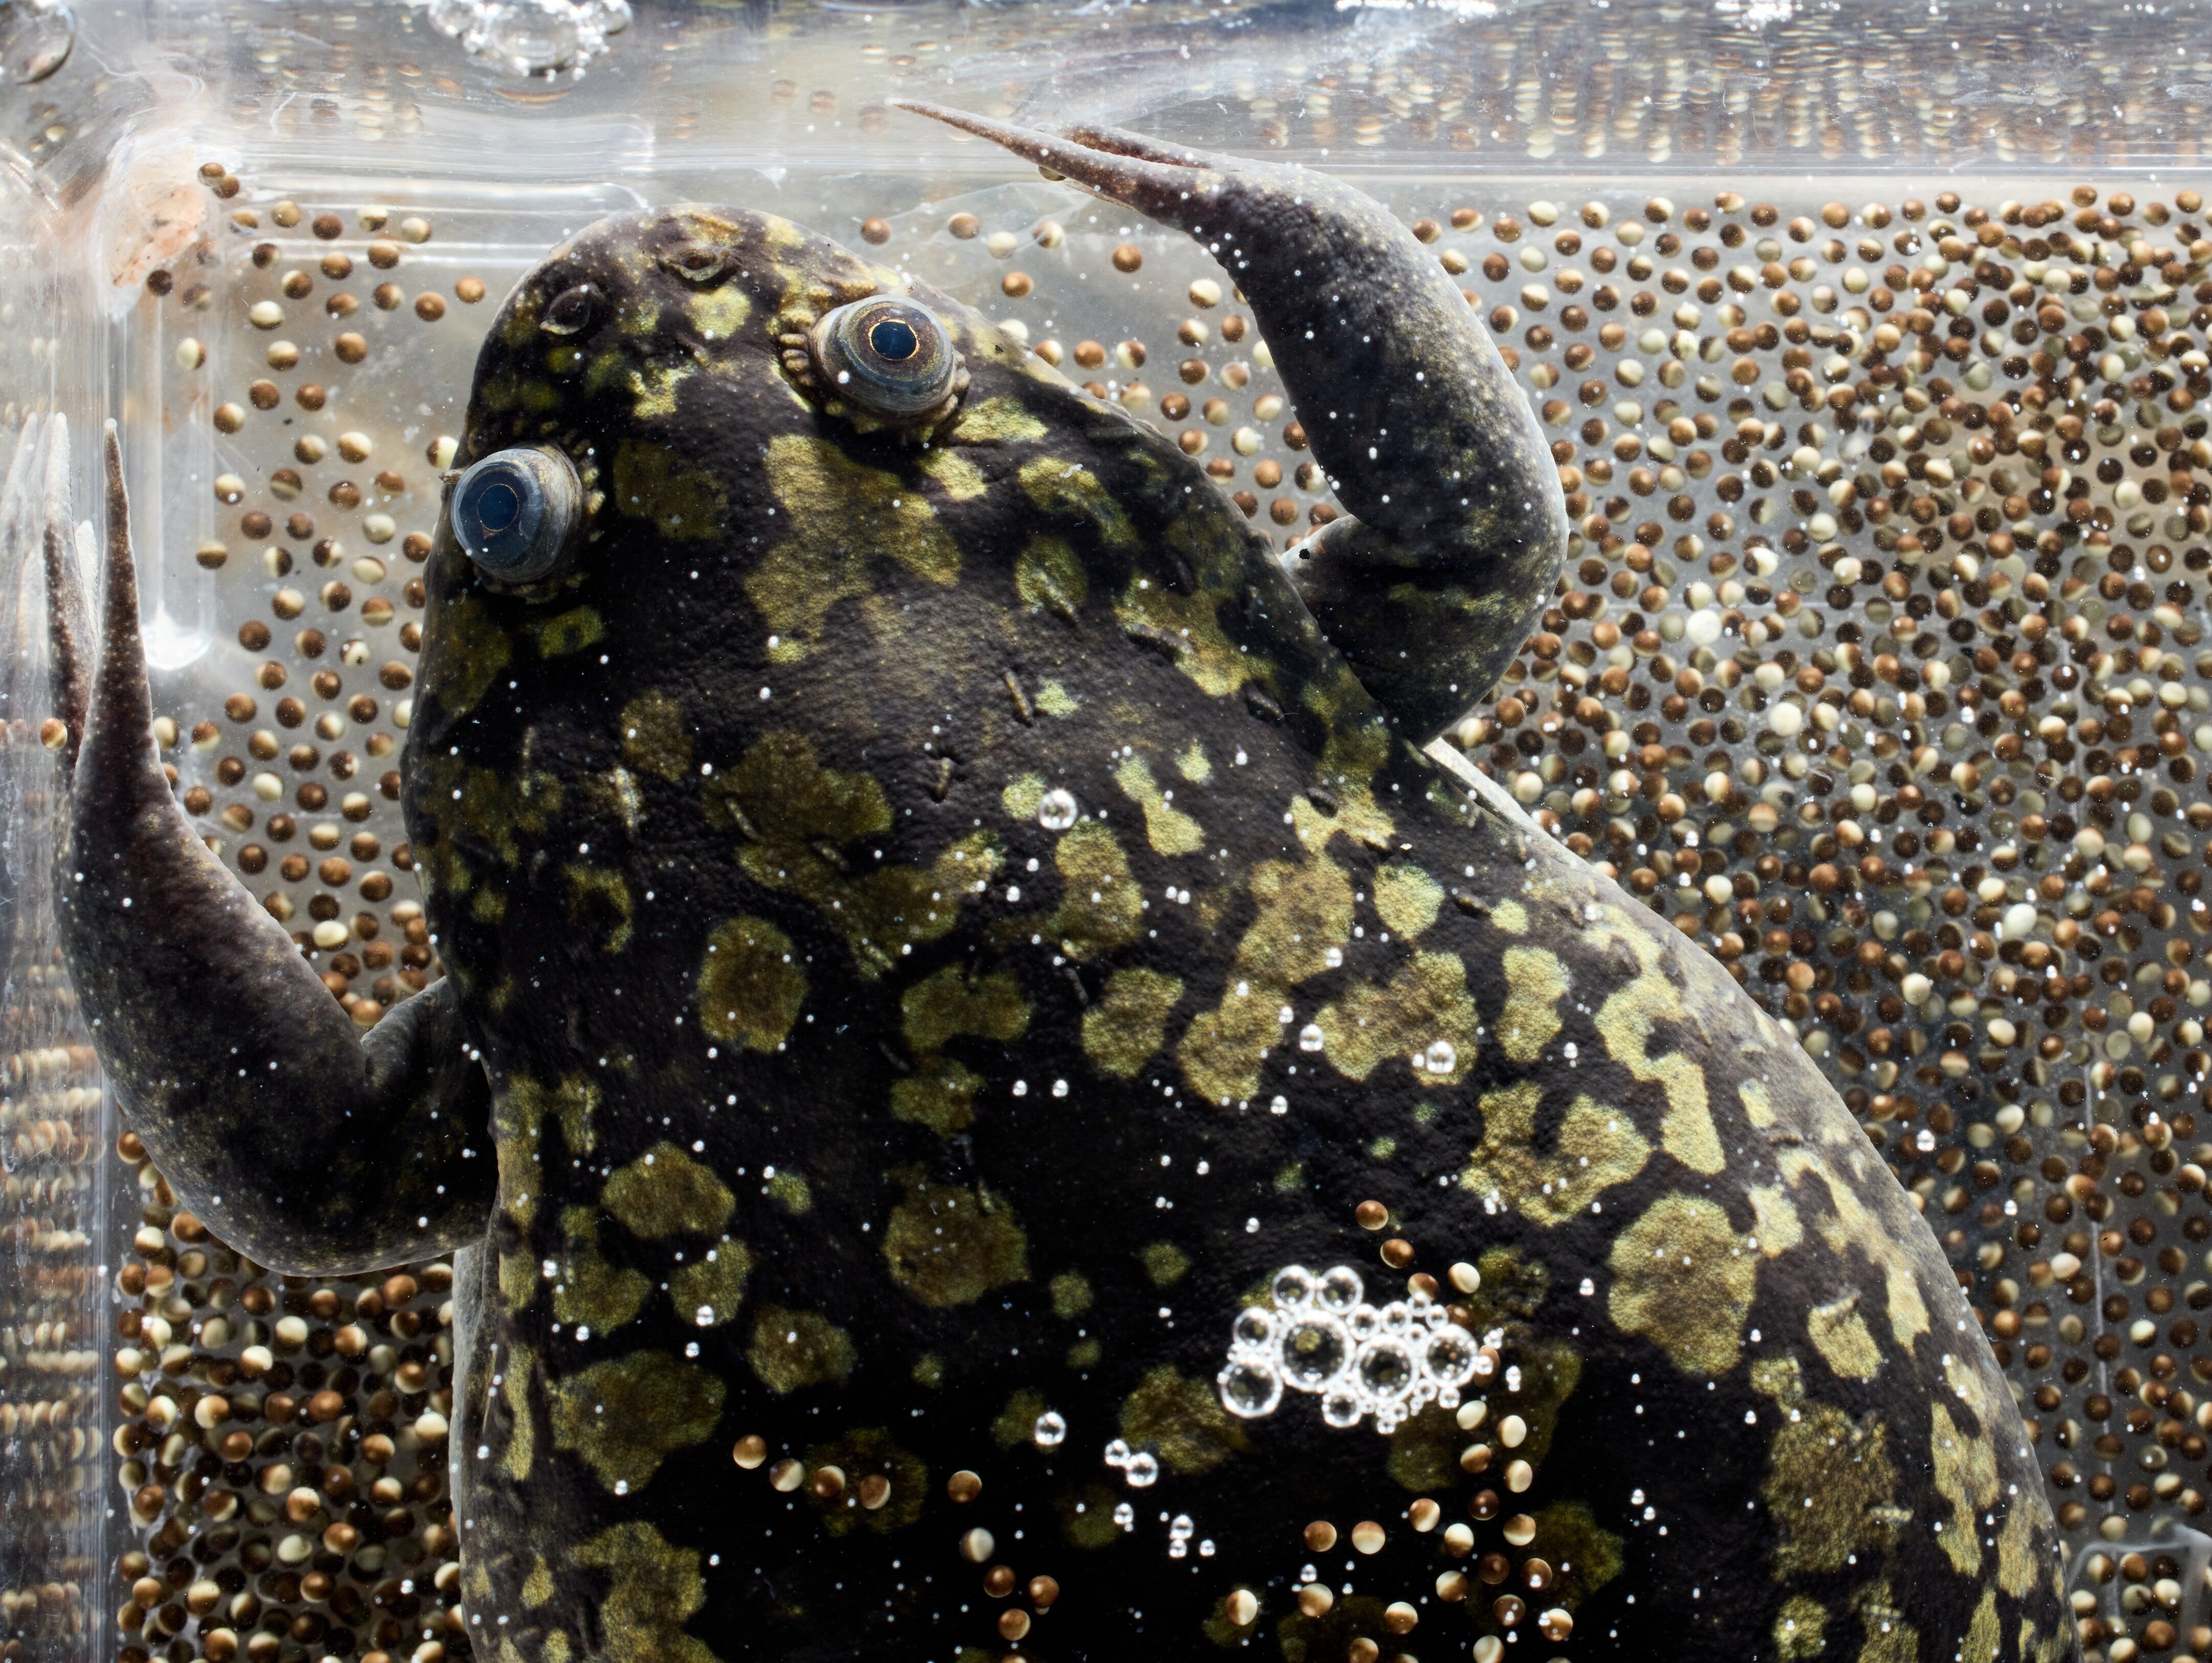 A photo of a clawed frog in a water tank and with numerous eggs